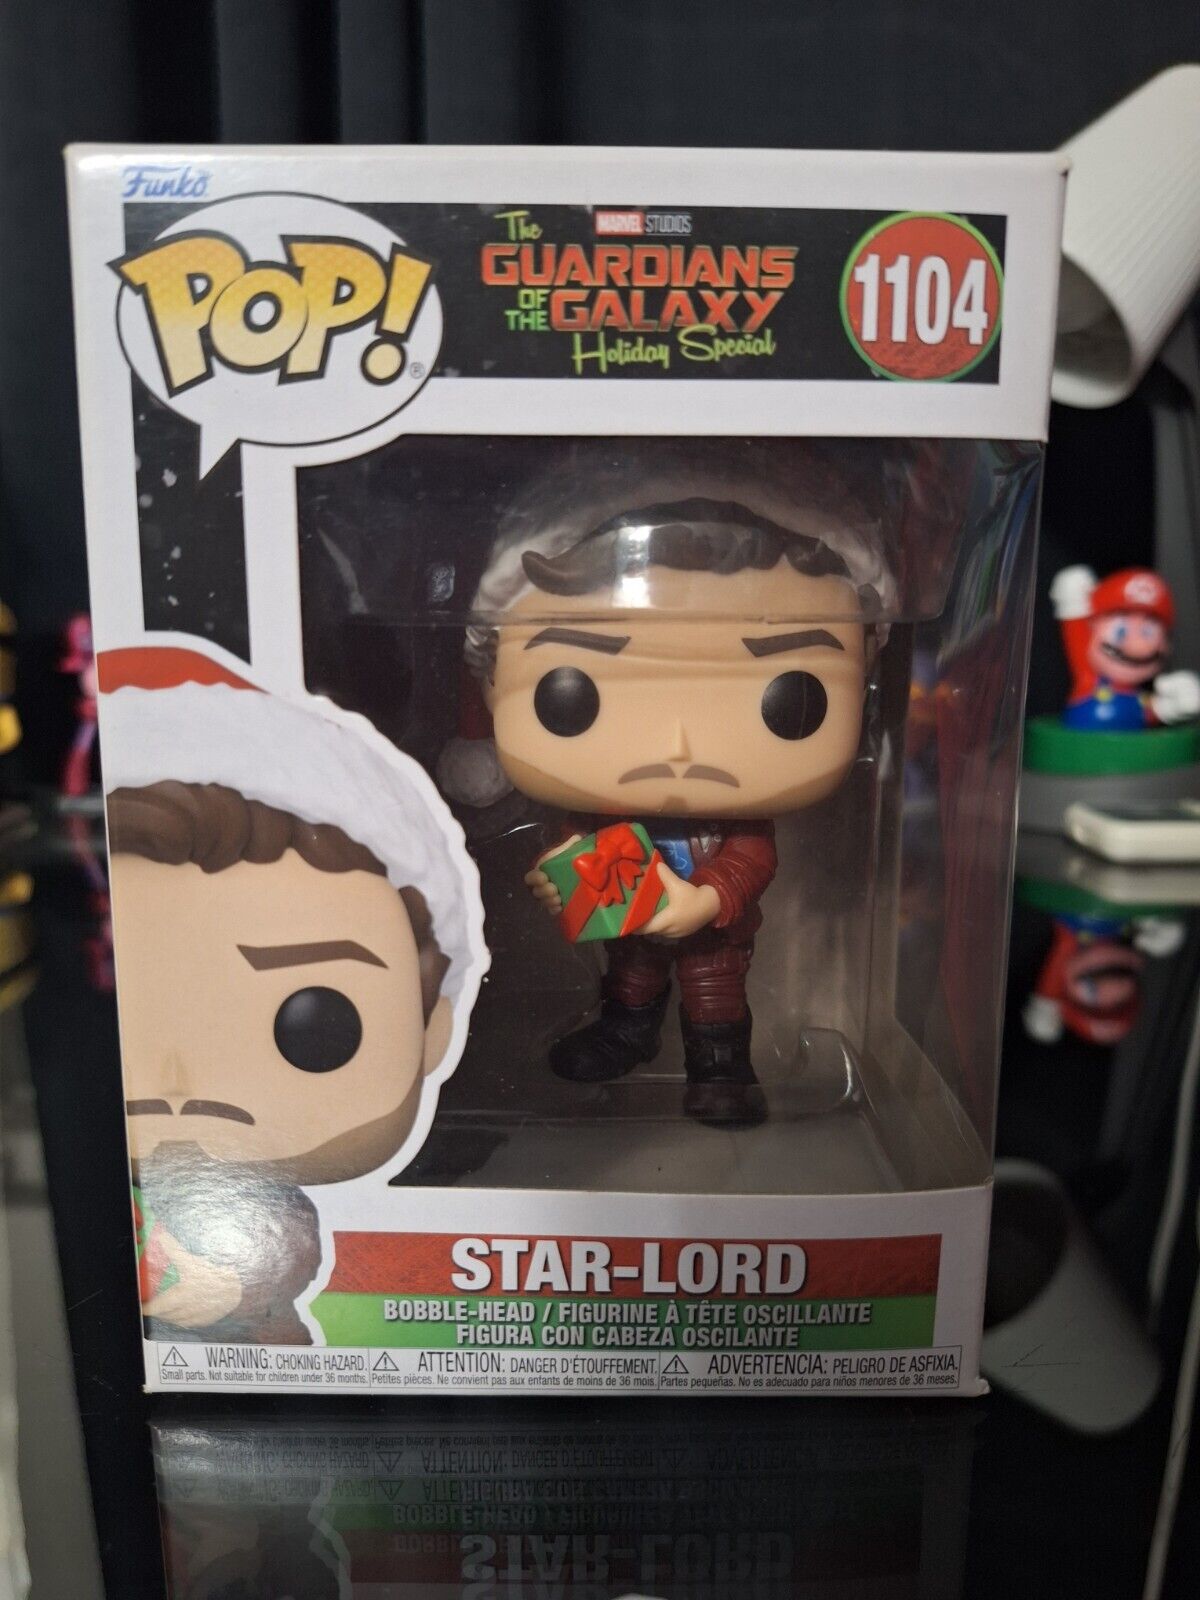 Guardians of the Galaxy Holiday Special Funko Pop #1104 Star Lord